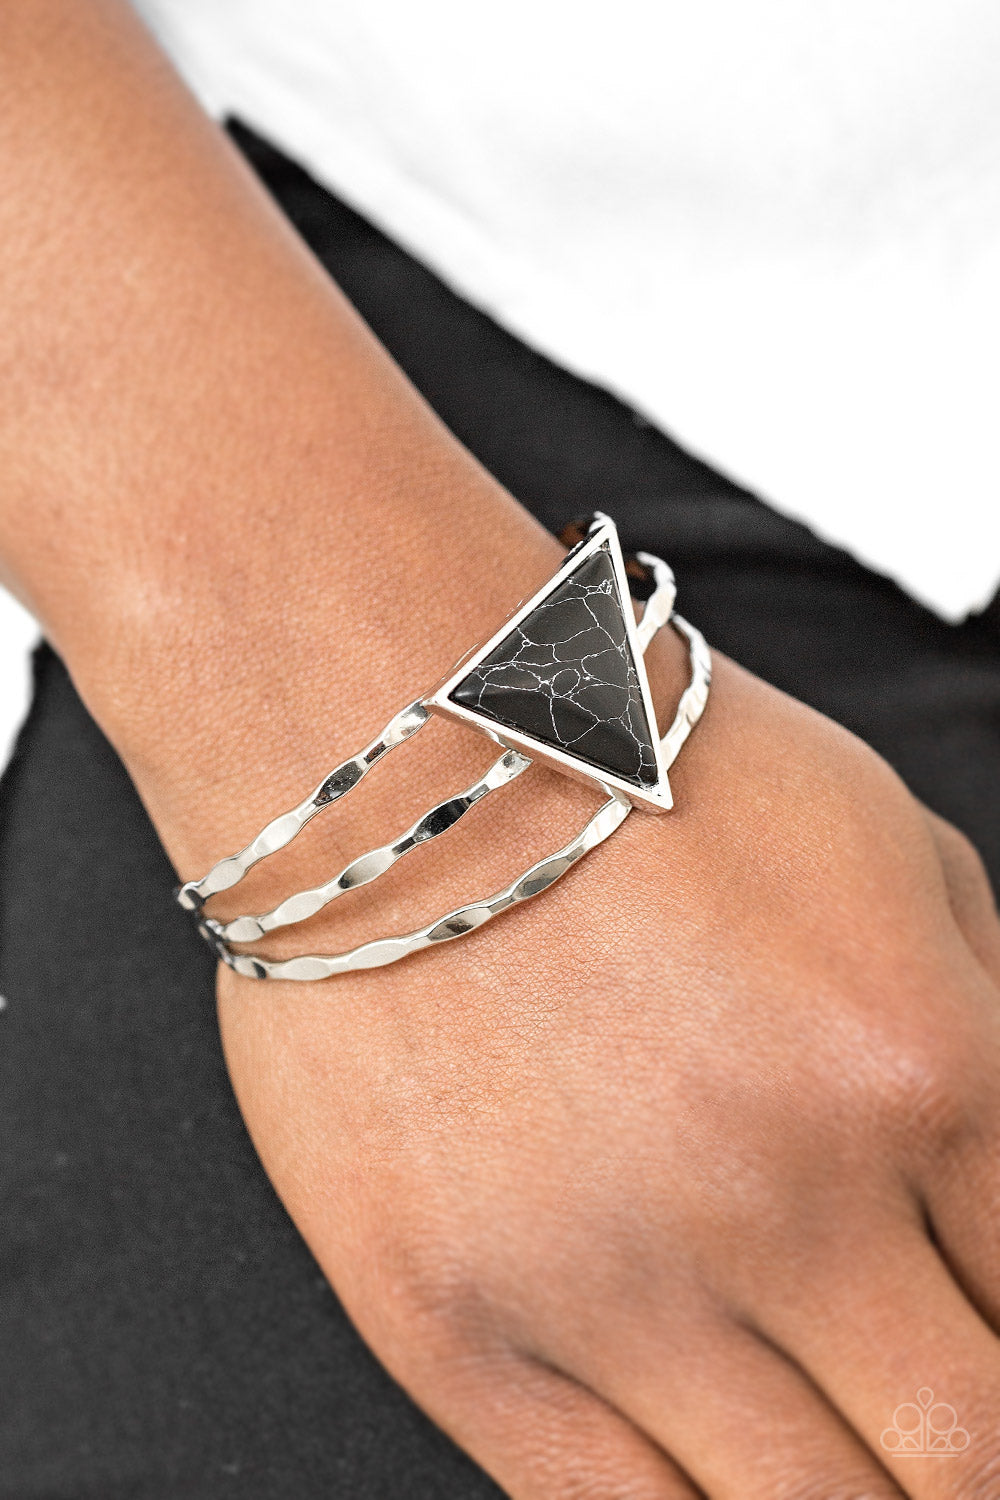 Paparazzi Put Up A FRONTIER - Black Stone - Hammered Shimmer Silver Cuff - Bracelet - $5 Jewelry With Ashley Swint